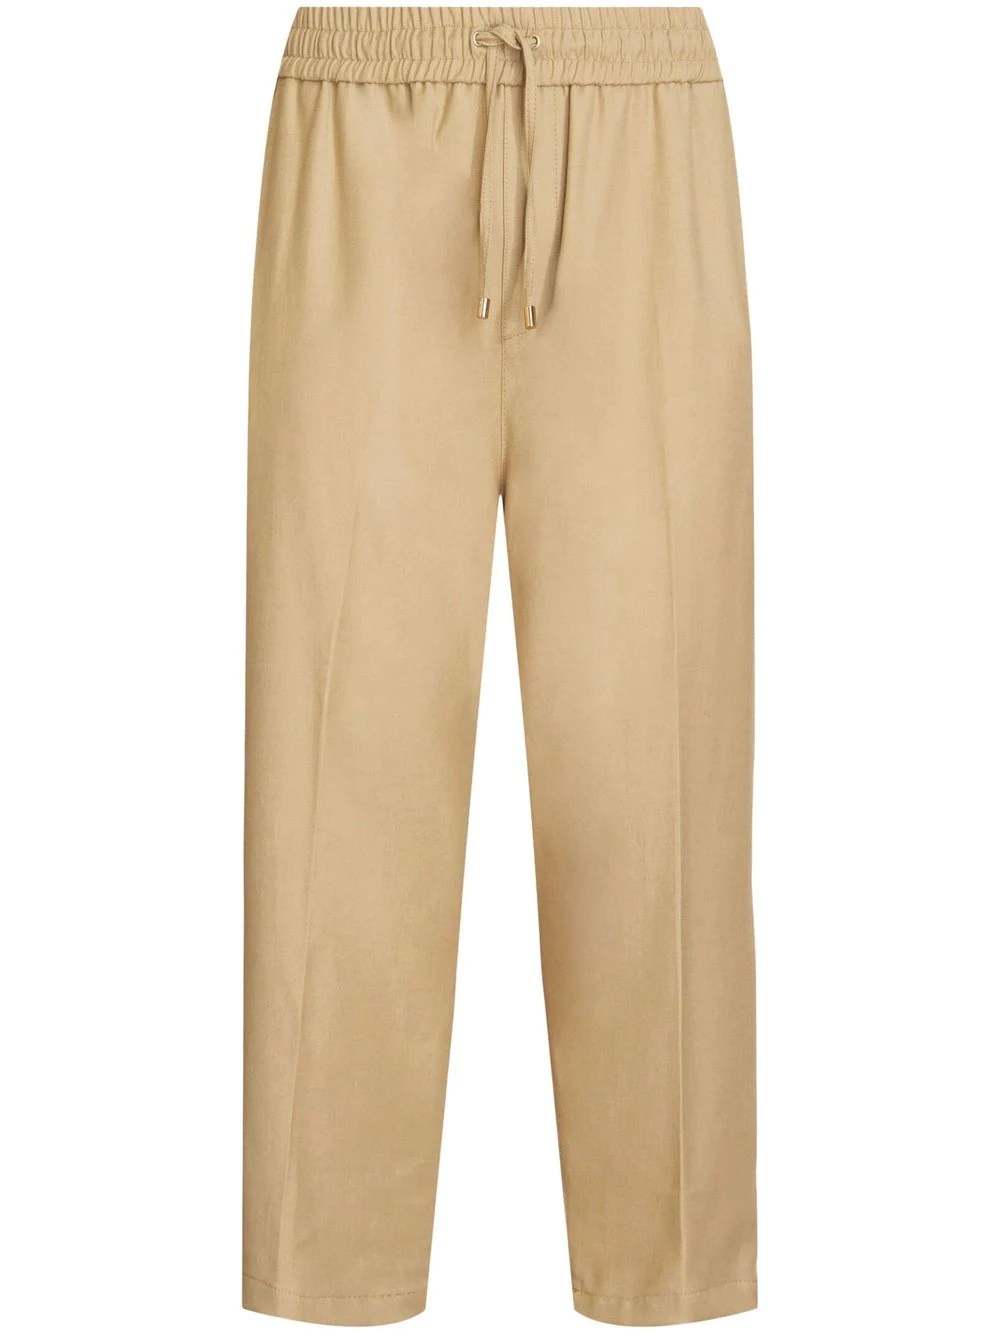 ETRO STRAIGHT LEG TROUSERS WITH ELASTICATED WAIST